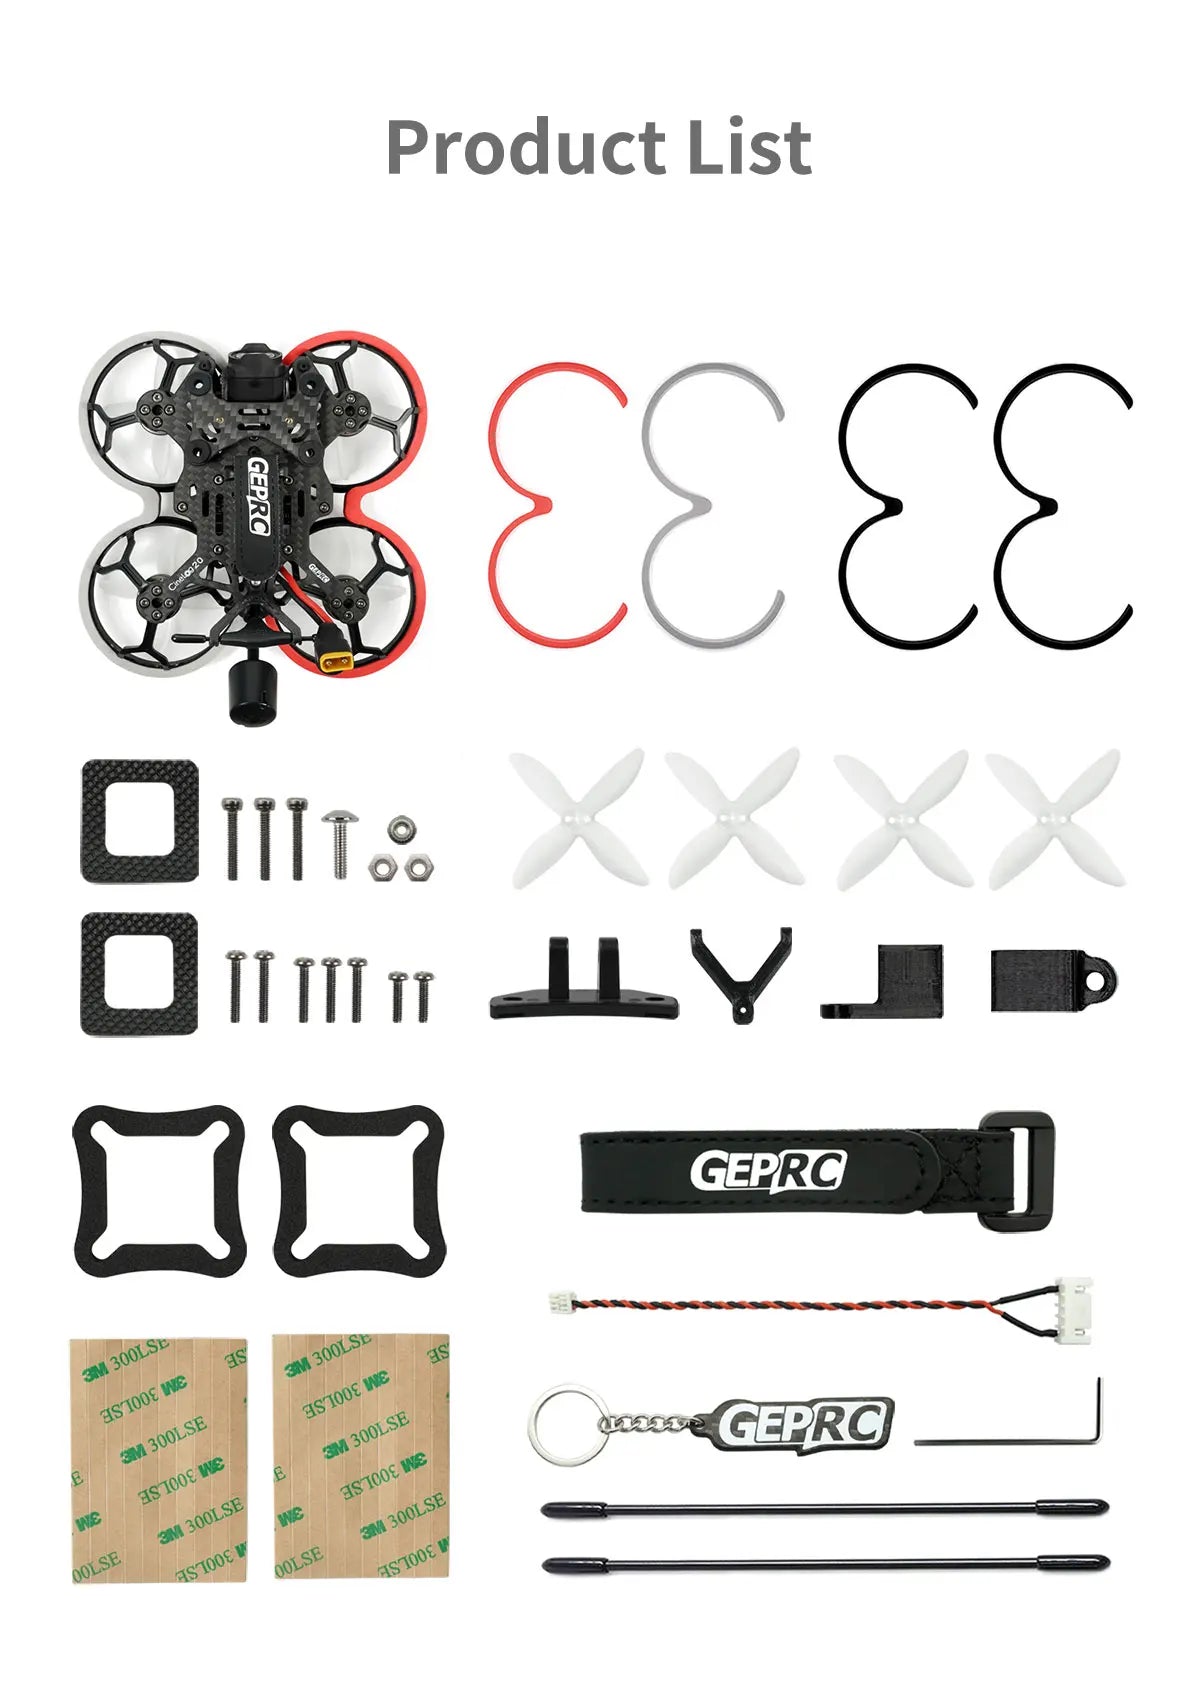 GEPRC Cinelog20 Analog FPV Drone, GEPRC Cinelog20 is an FPV drone designed for the shooting needs of complex